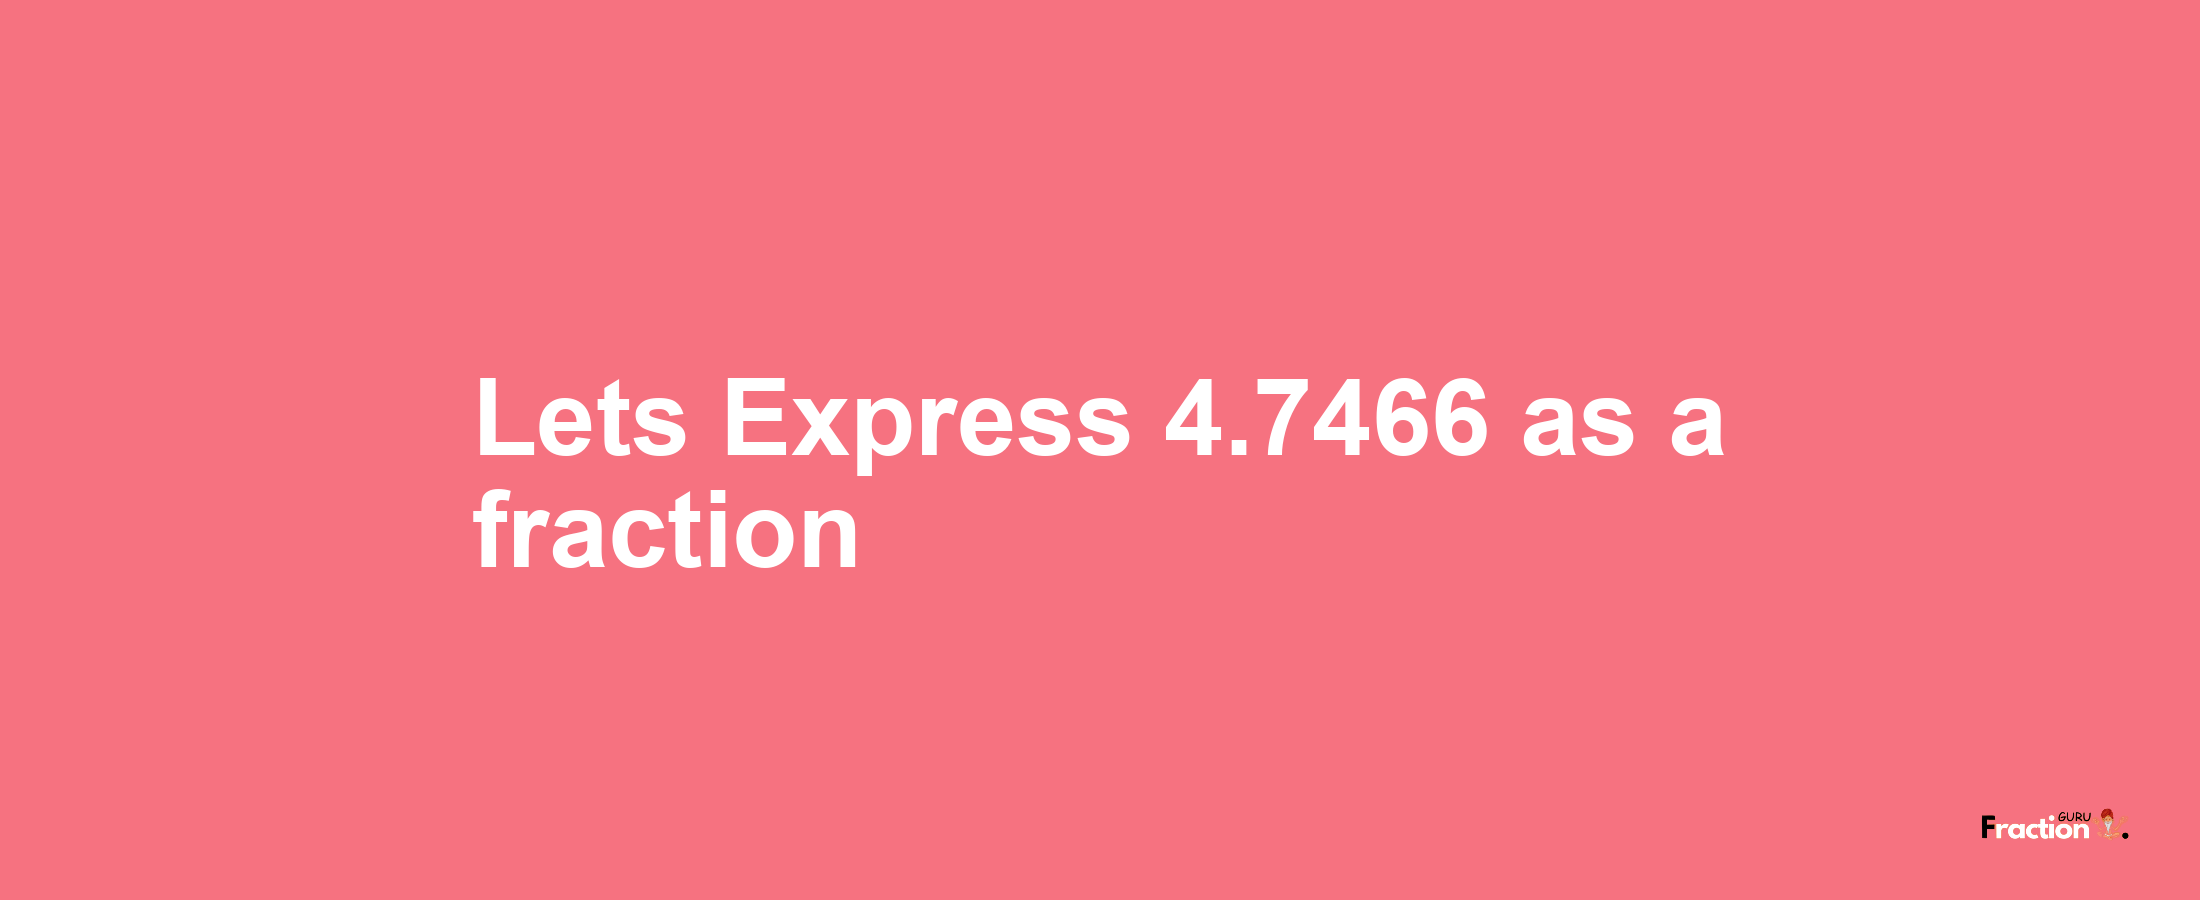 Lets Express 4.7466 as afraction